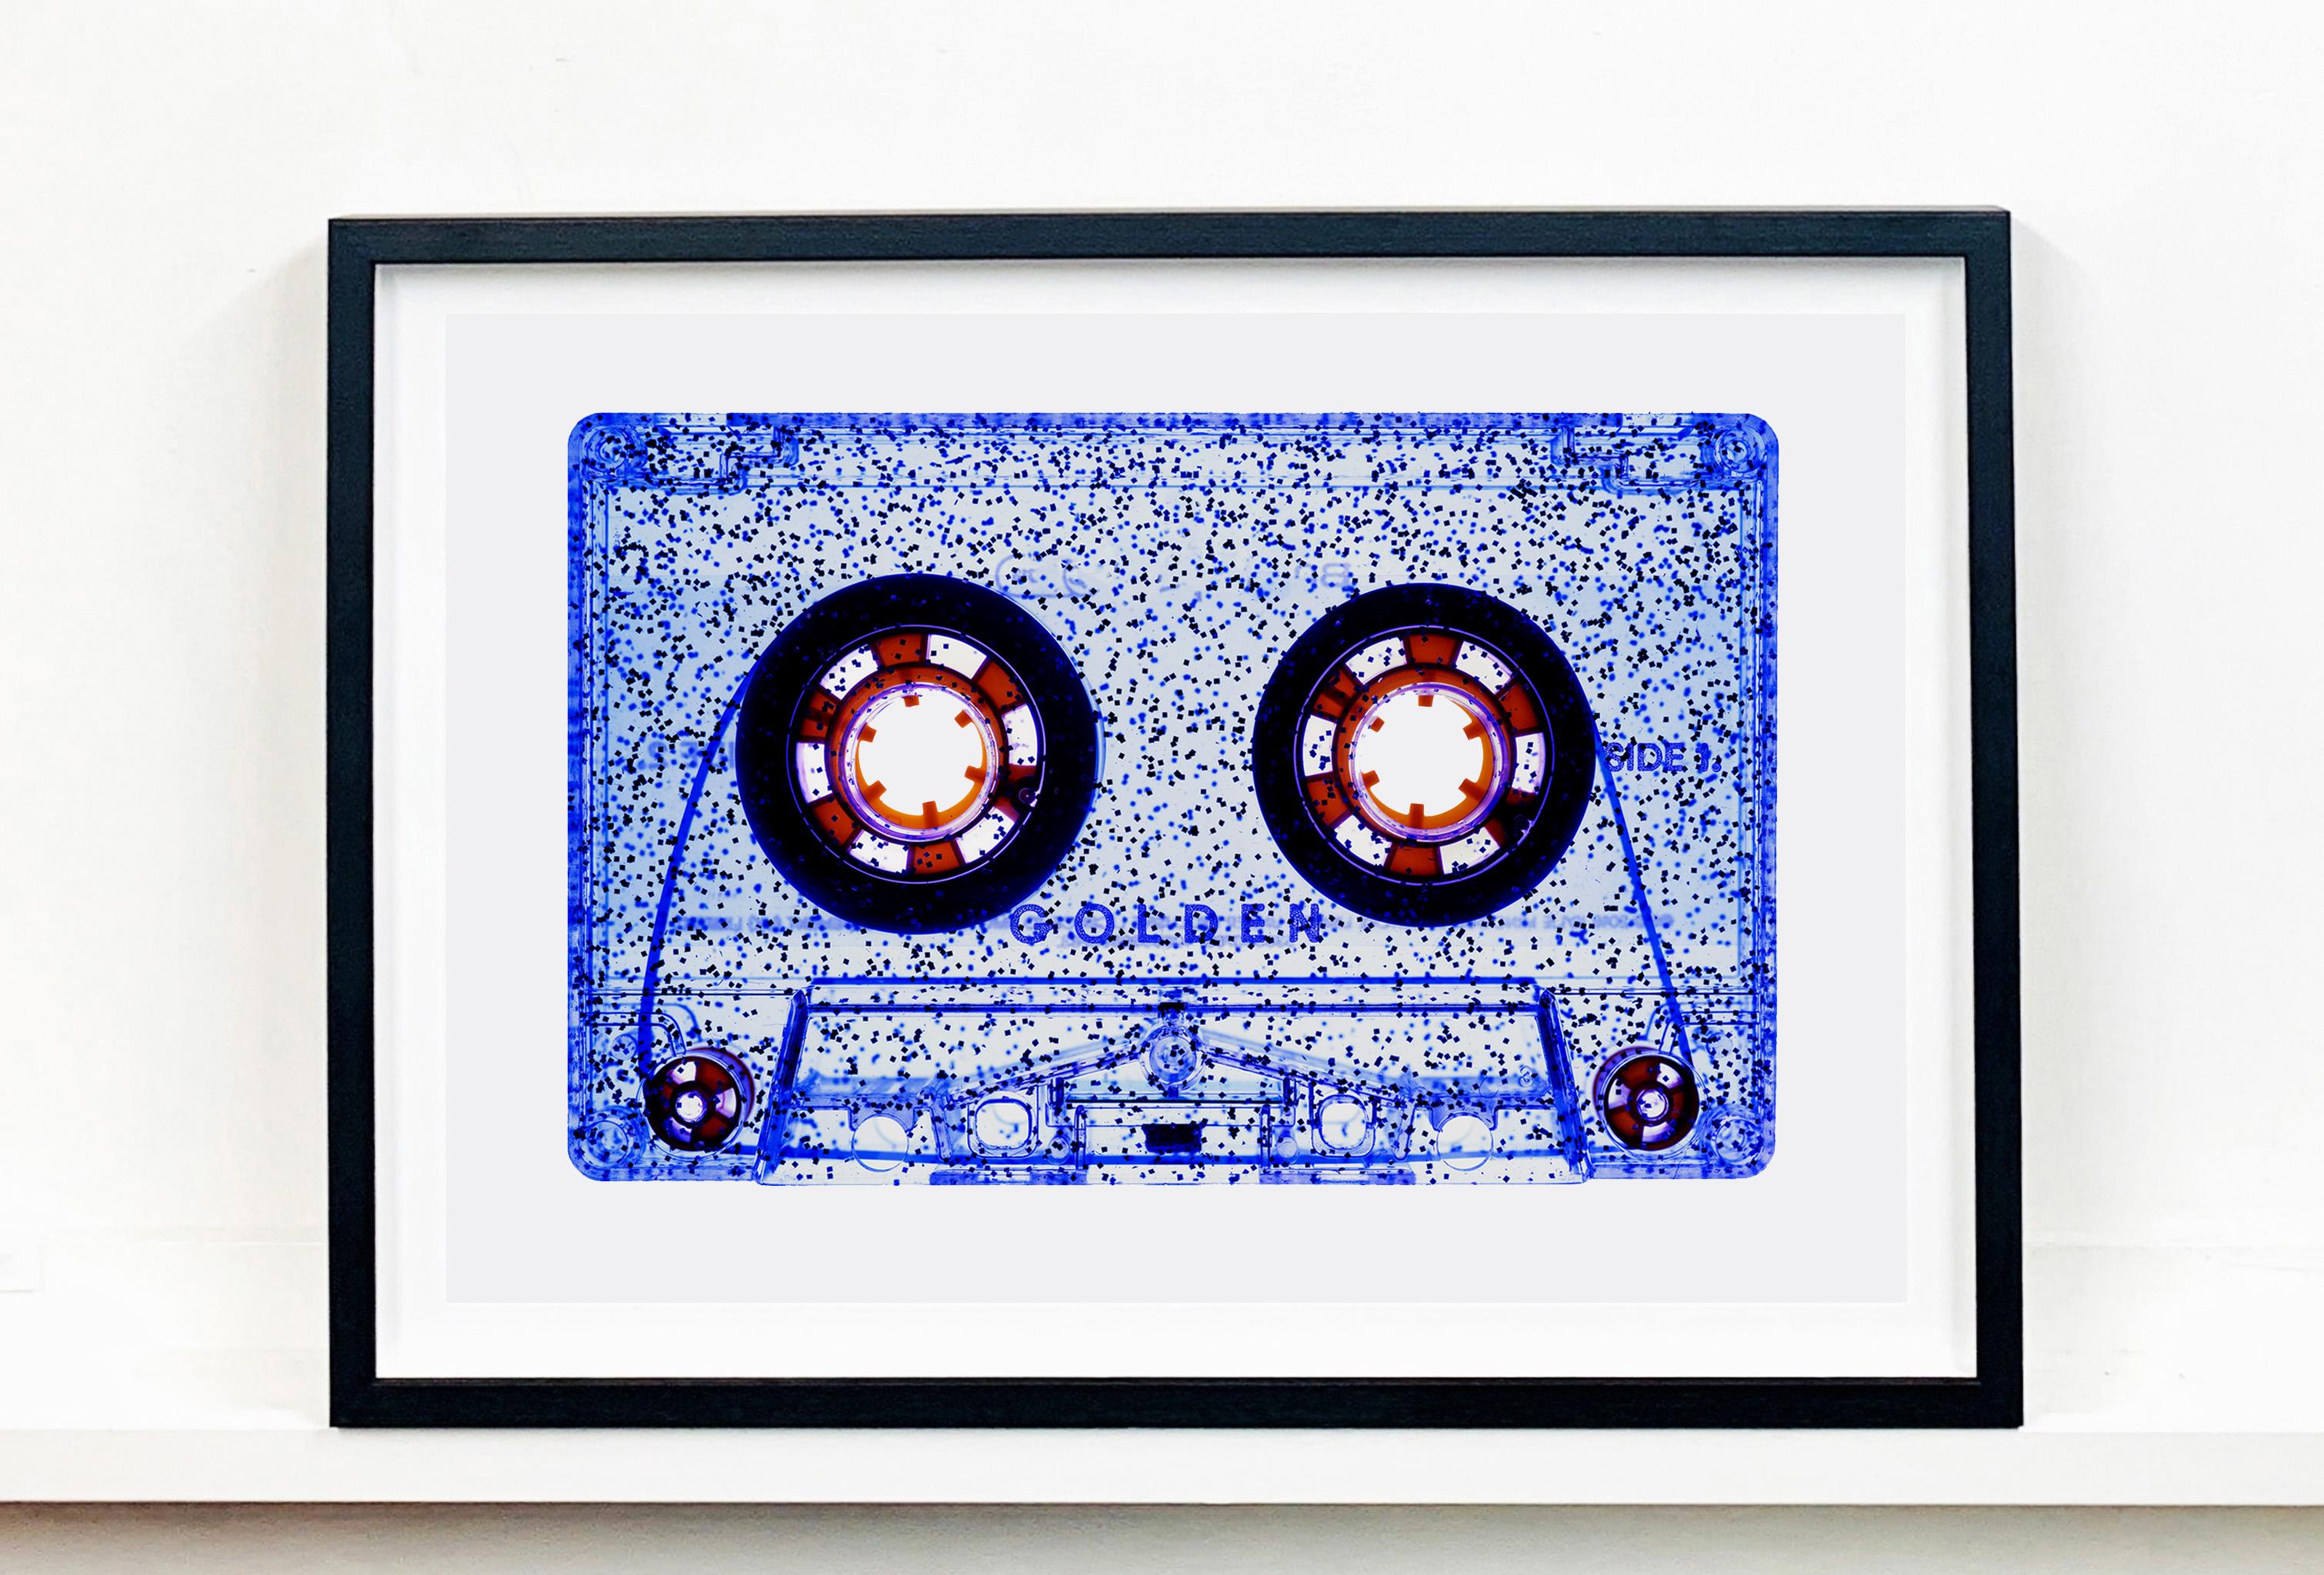 Tape Collection, All That Glitters is Not Golden (Blue) - Pop Art Photography - Print by Heidler & Heeps